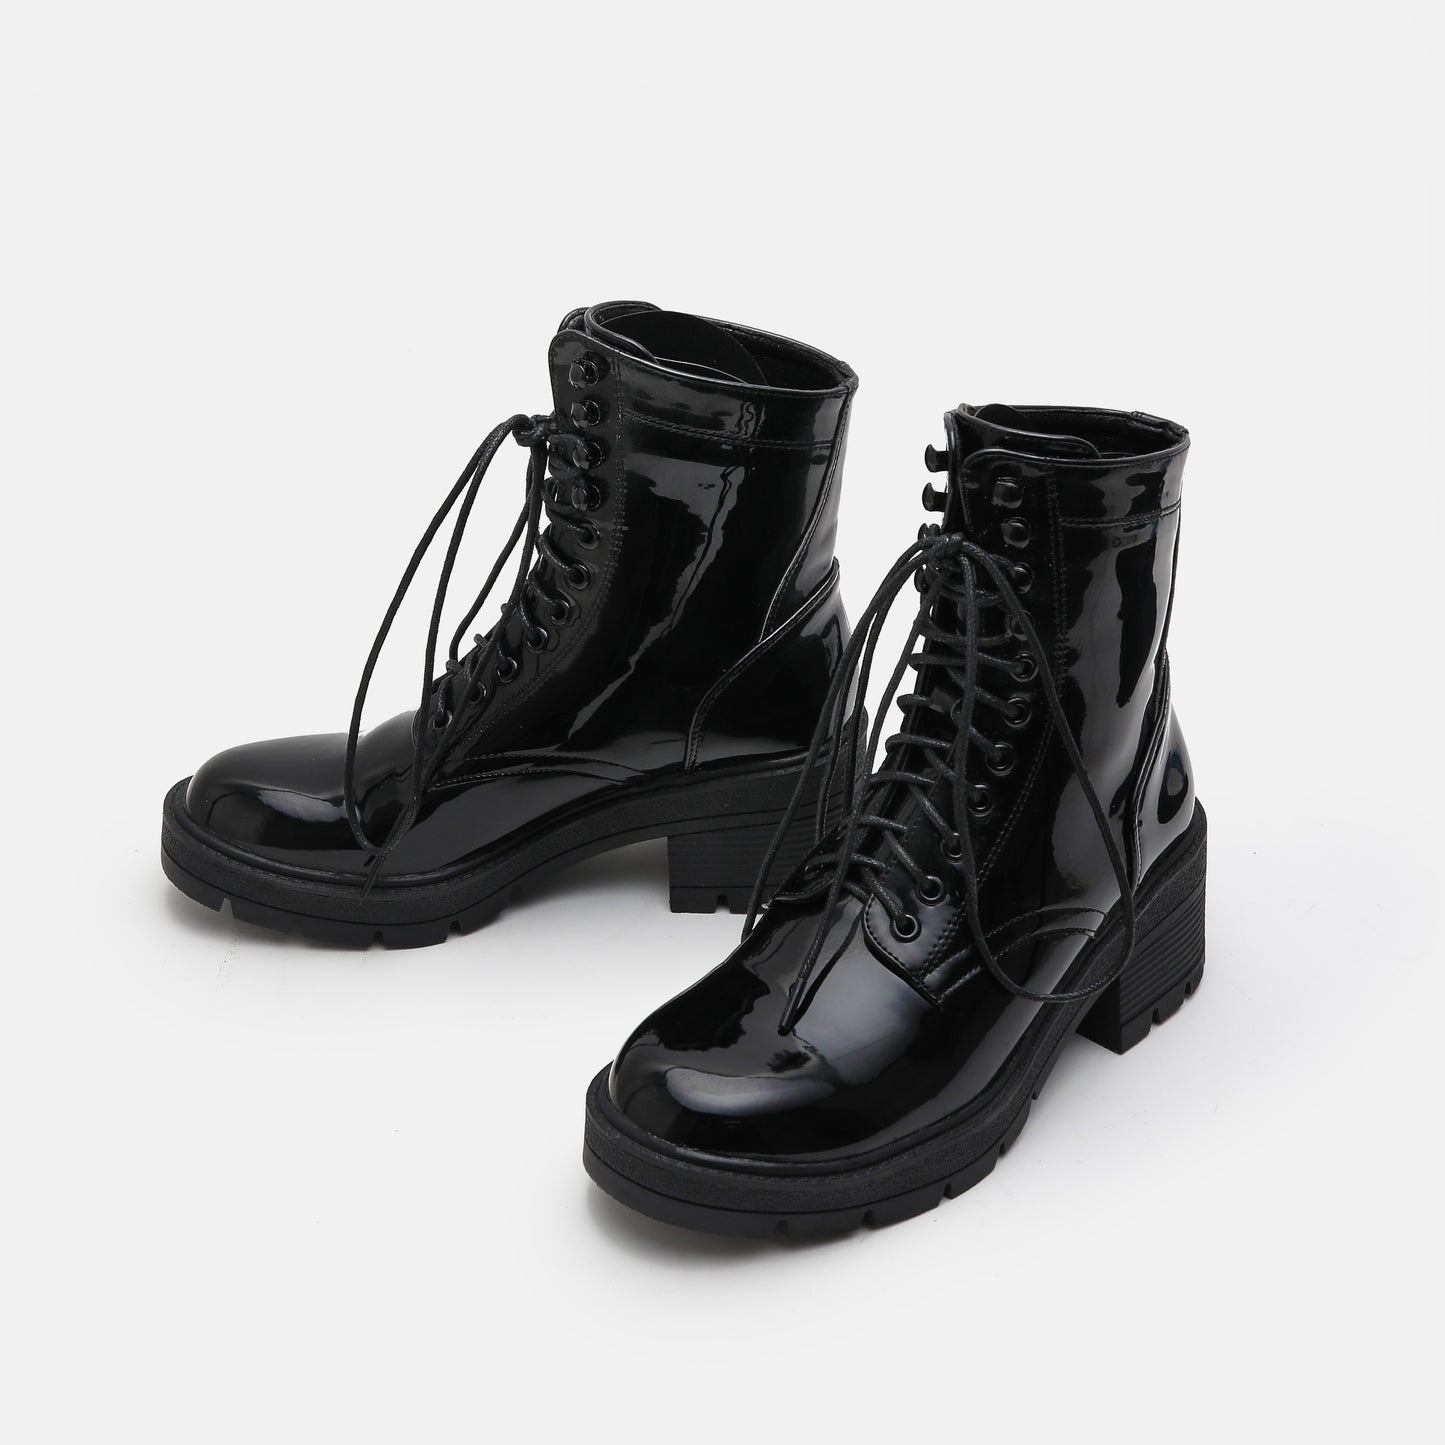 Patent Lace-Up High Heel Chelsea Boots